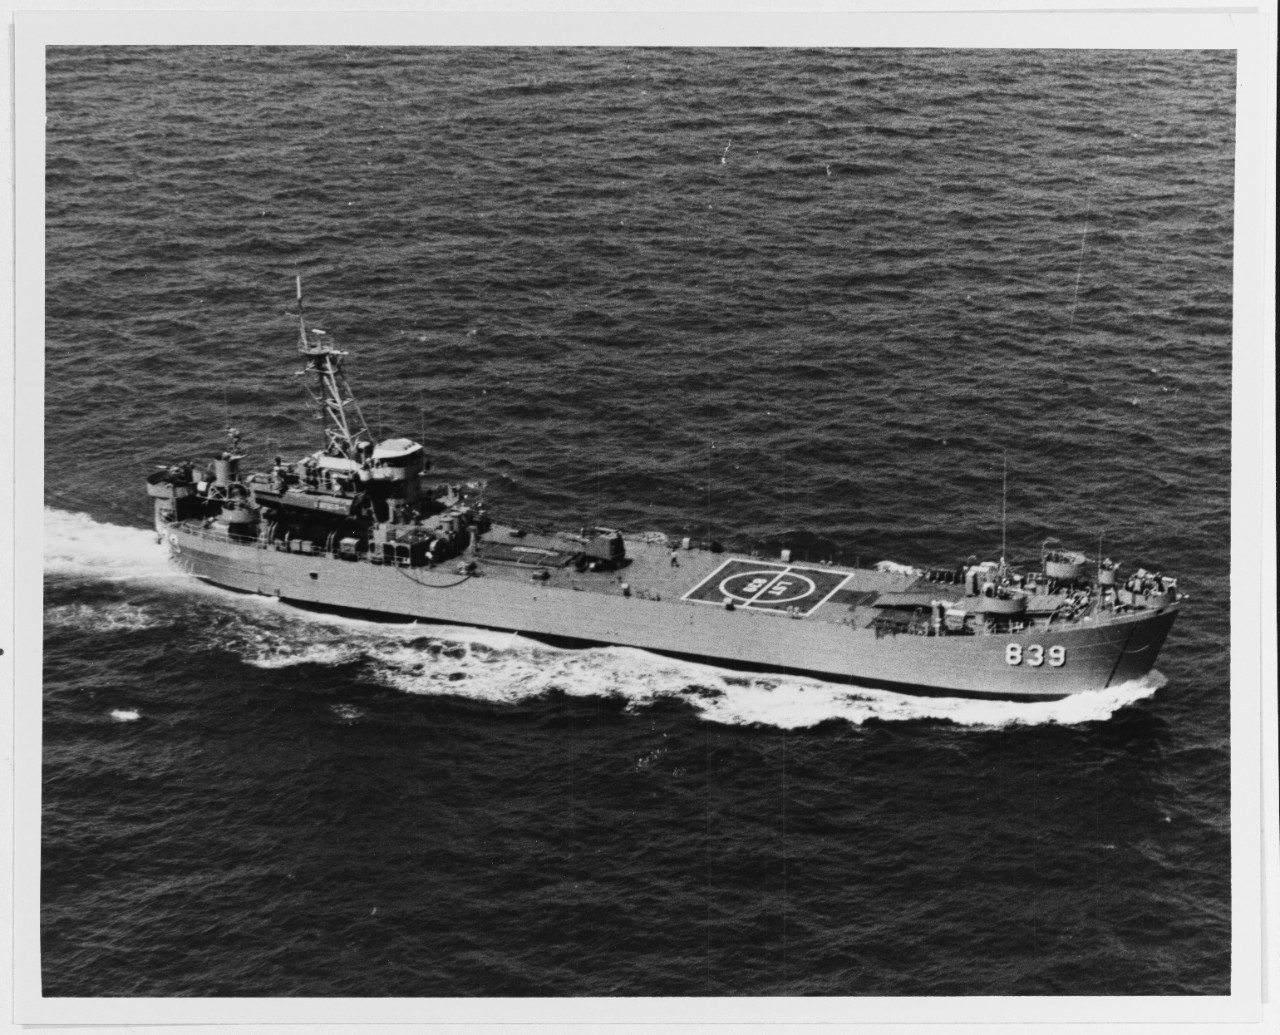 USS IREDELL COUNTY (LST-839)